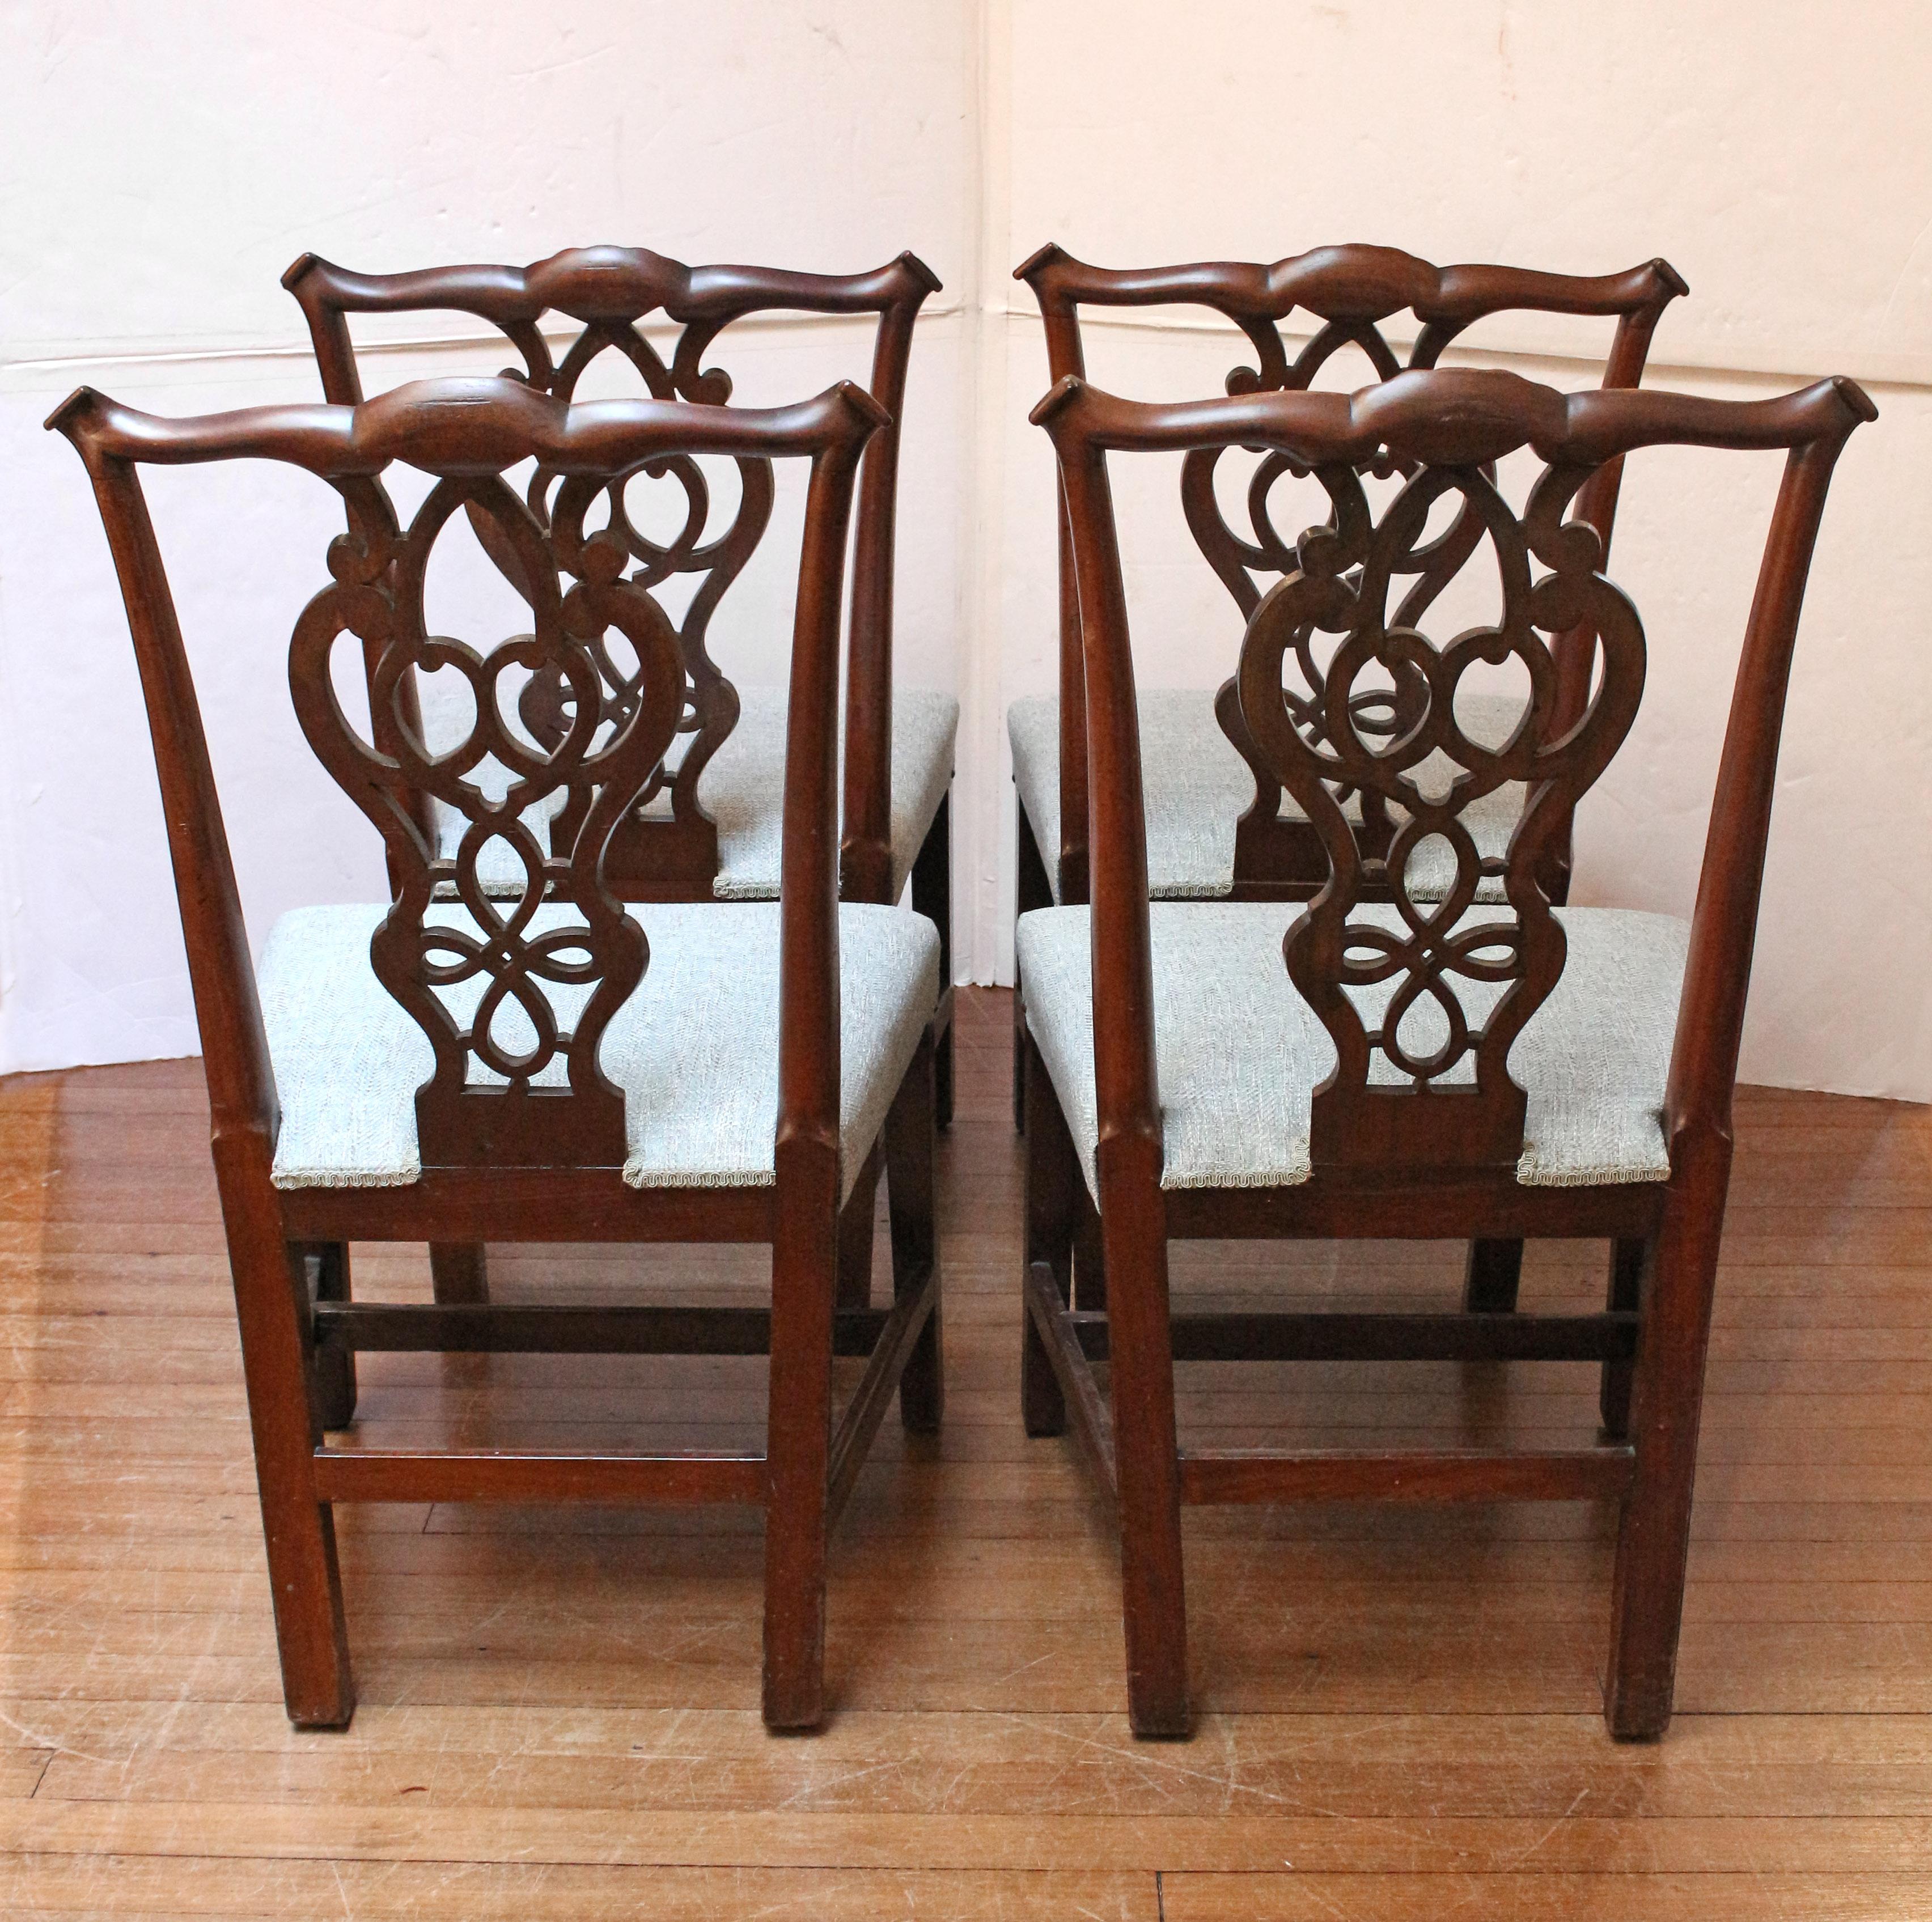 Circa 1765 Set of 4 English George III Period Side Chairs In Good Condition For Sale In Chapel Hill, NC